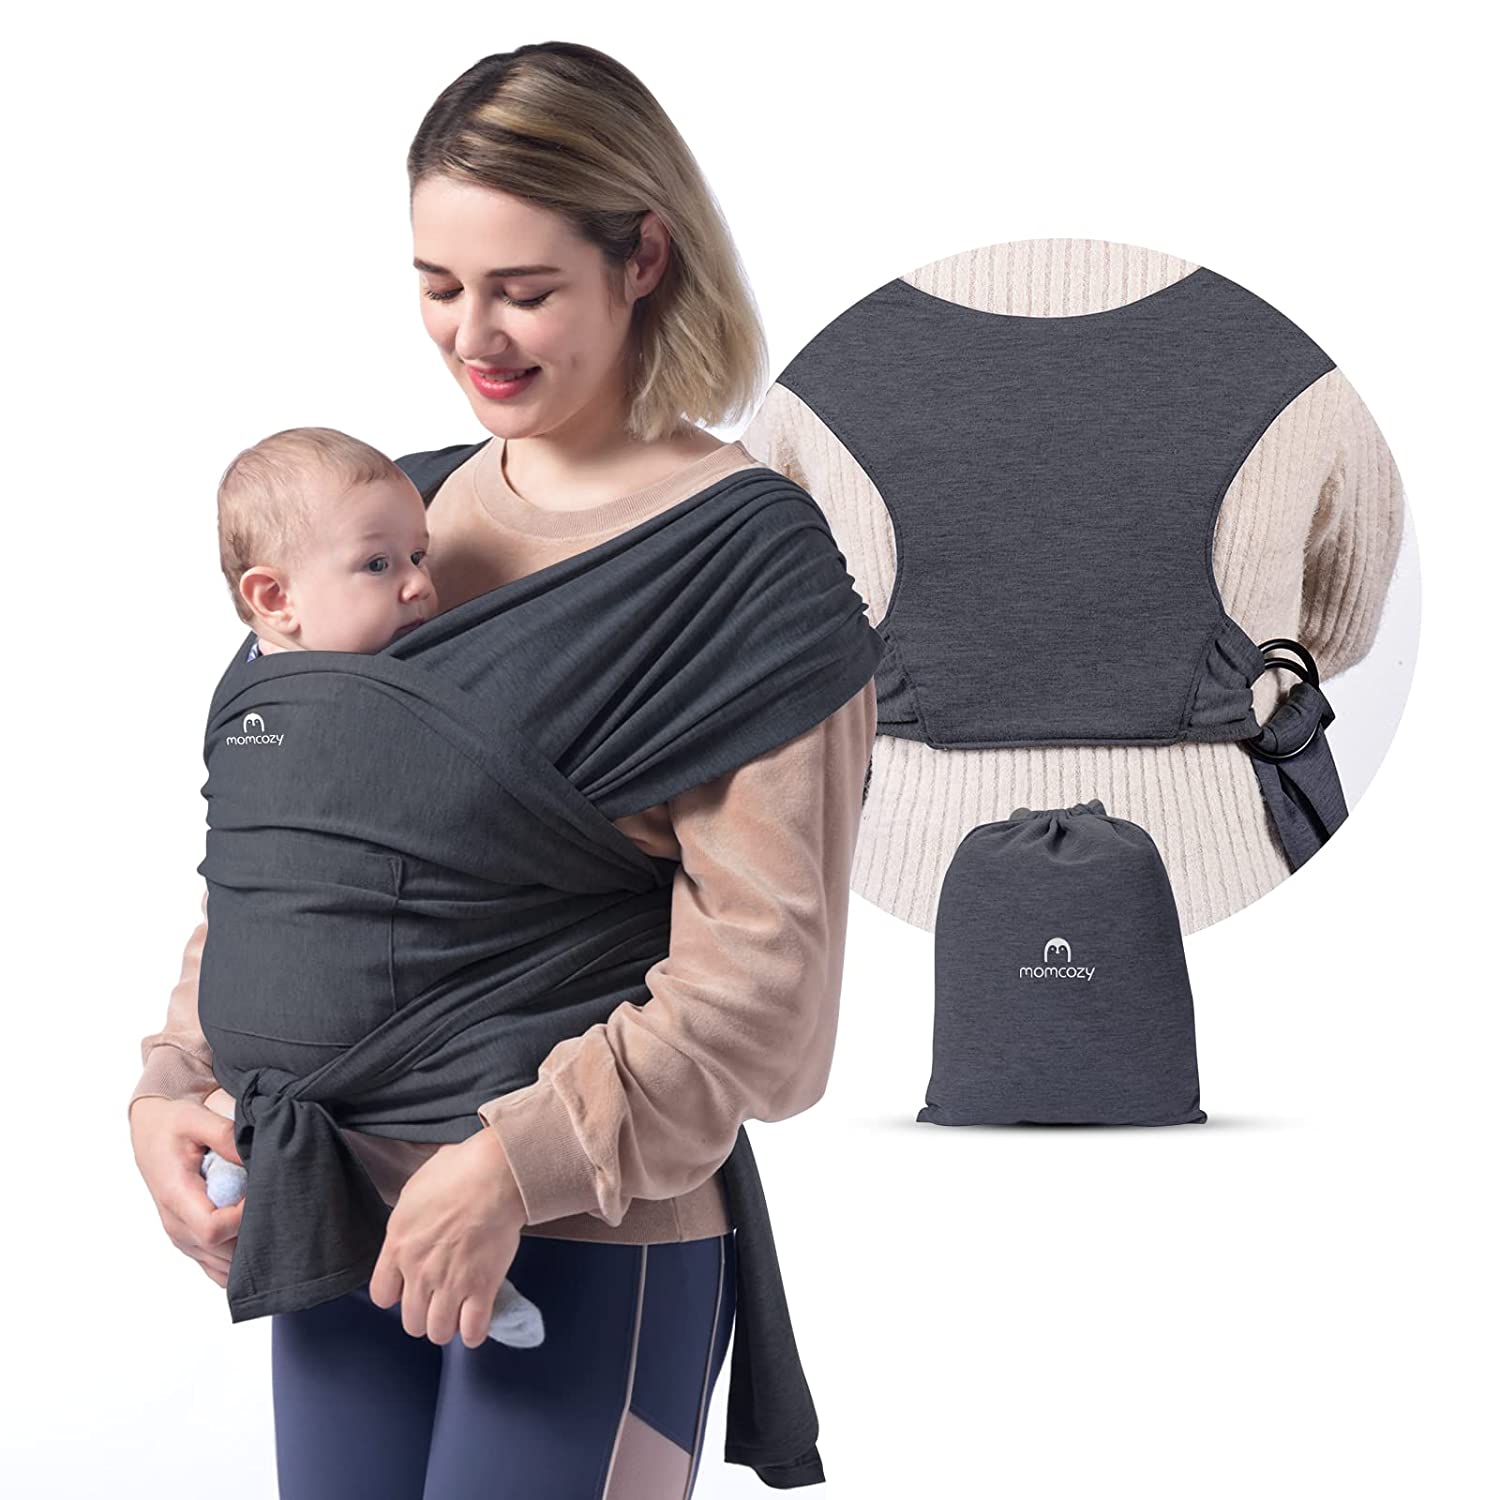 Momcozy Baby Carrier Sling for Newborns up to 50 lbs, Adjustable for Adults Sizes XXS-XXL, Baby Newborn Ergonomic Front/Back Baby Sling Newborn